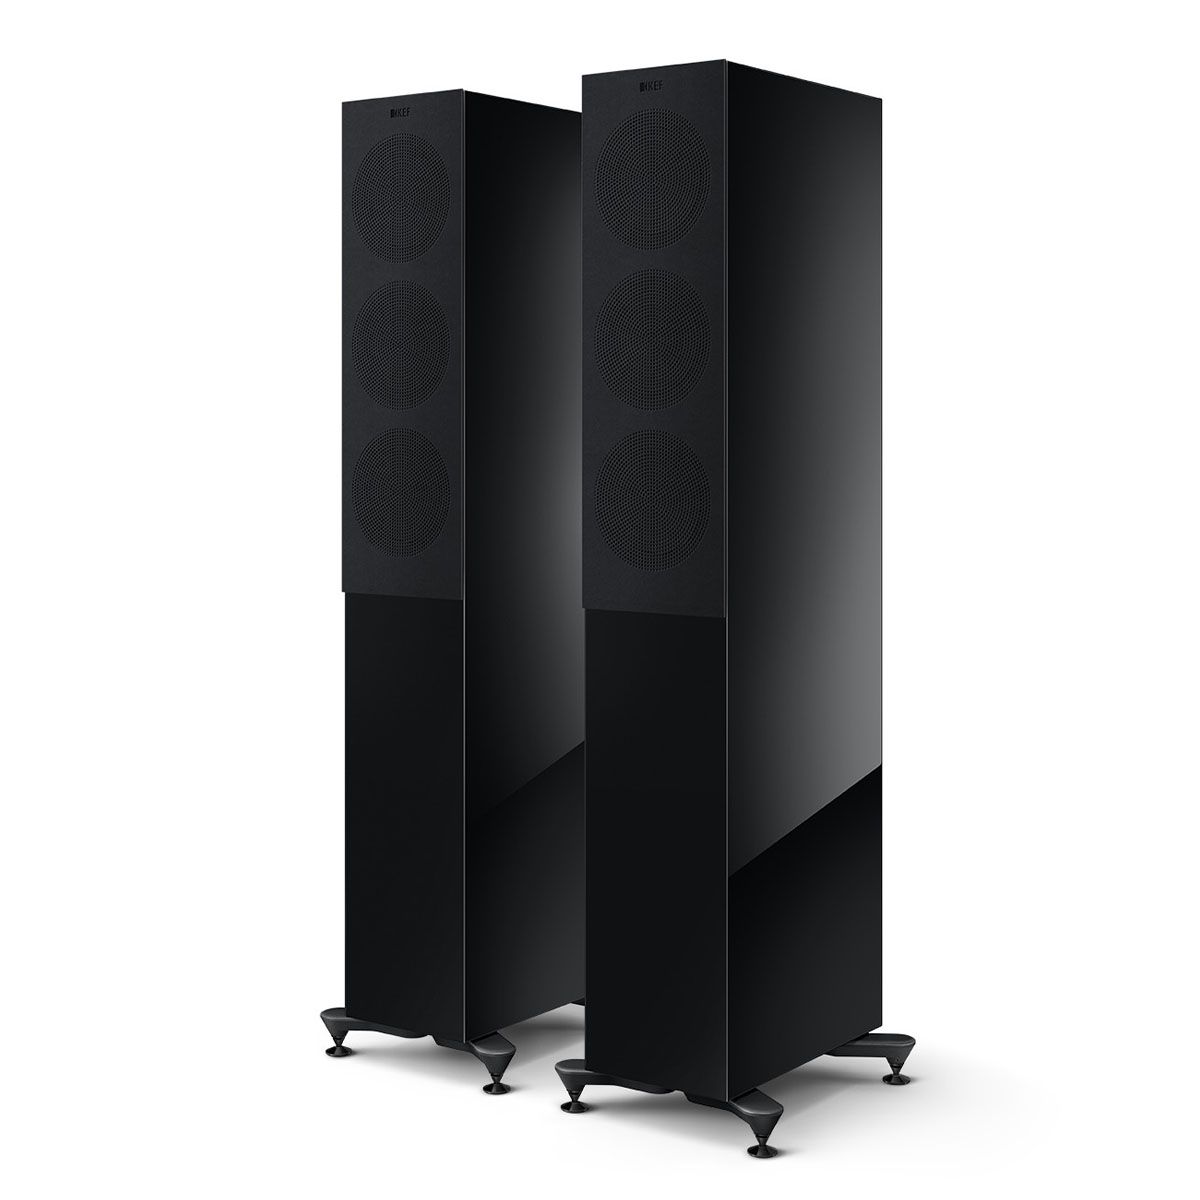 KEF R5 Meta Tower Speaker - Each black angled front view of pair with grilles